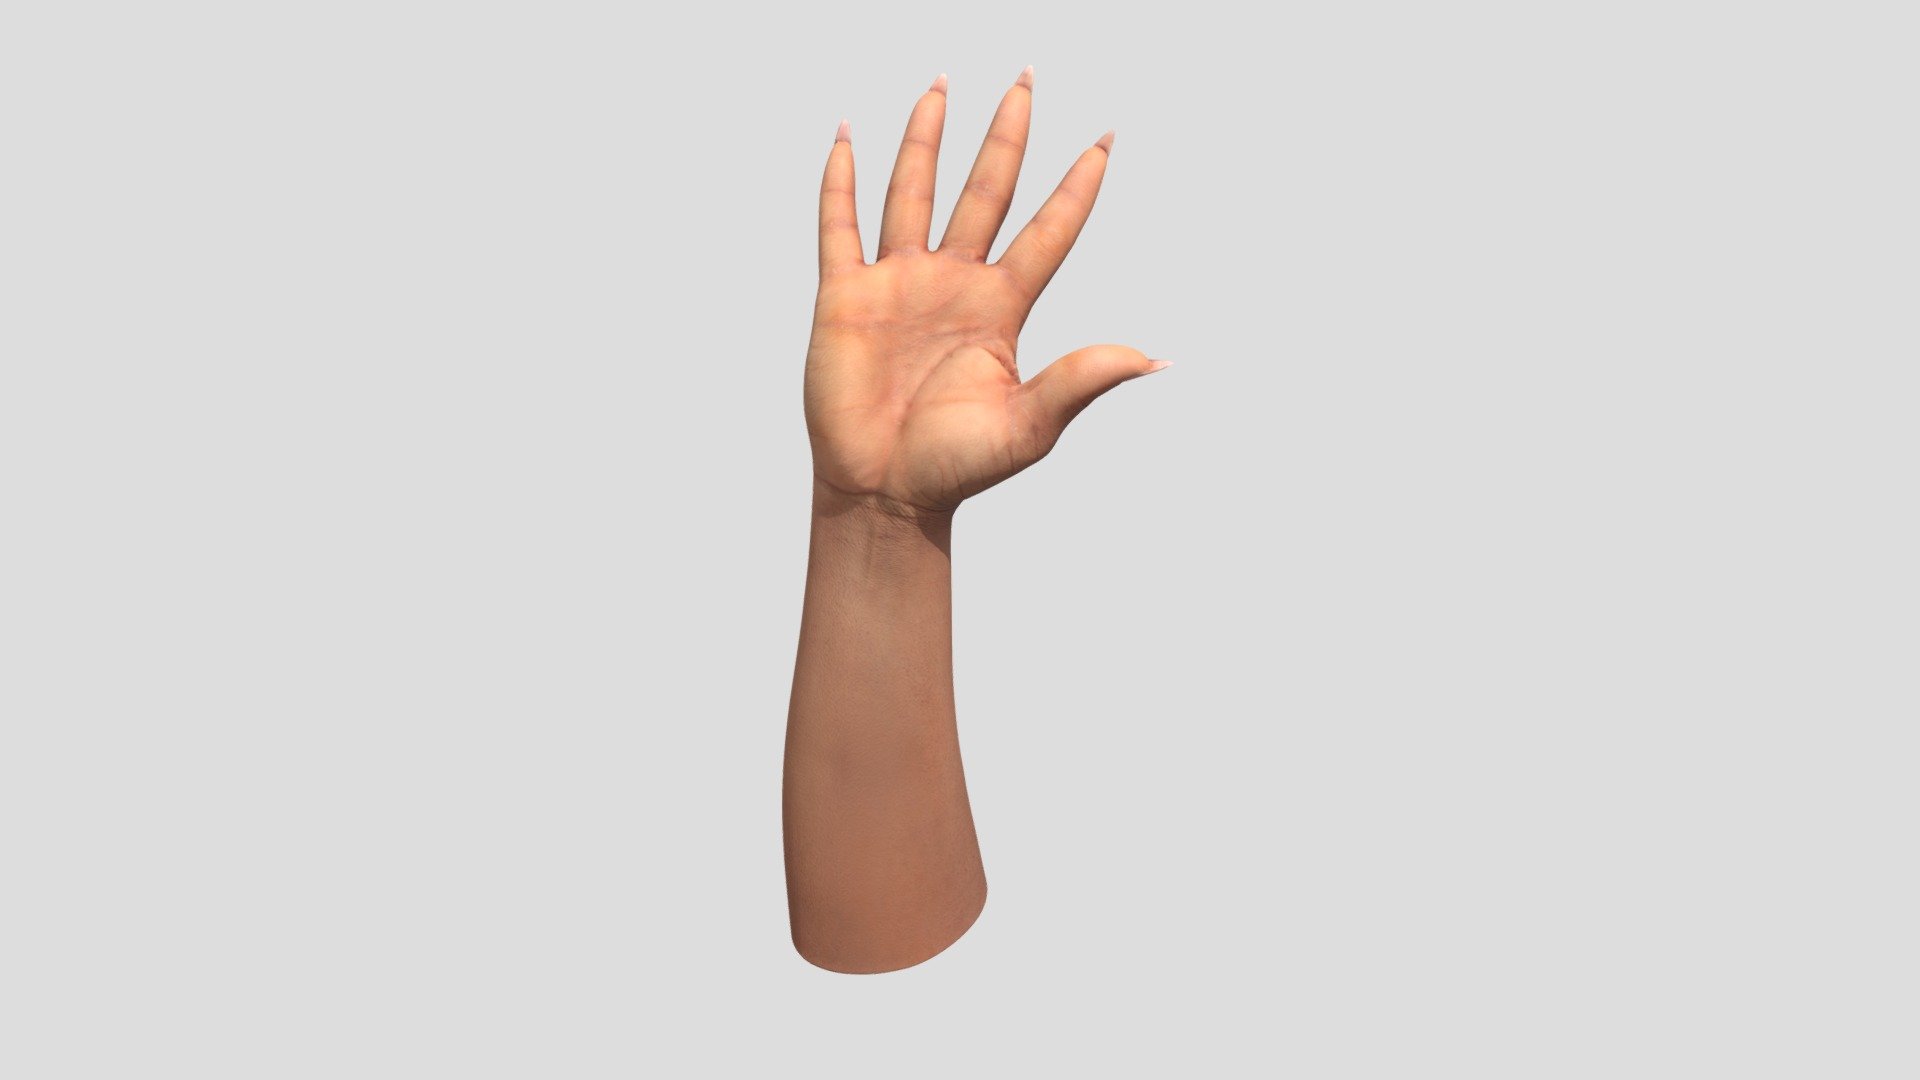 We would like to introduce you to one of the many retopologized hands that offers precise retopology.This hand is perfect for anyone looking for a realistic and aesthetically crafted model for their projects. Find out how this collection can enrich your creative work and give it the visual punch it needs!

Ethnicity: Black Gender: female Age: 35 Height: 165 cm Weight: 55 kg

NOTE: Retopologized scan with postproduction.

Technical Specifications:

1 x OBJ. File / 16 600 polys 2 x 8K PNG Texture - Diffuse, Normal

3Dsk provides all you need from virtual casting studio. Model casting, neutral &amp; morph expression scans, full body scans, accessories and cloth scans, 3D postproduction, photoshooting of full body, portrait, hair, eyes and skin &amp; other on demand services 3d model